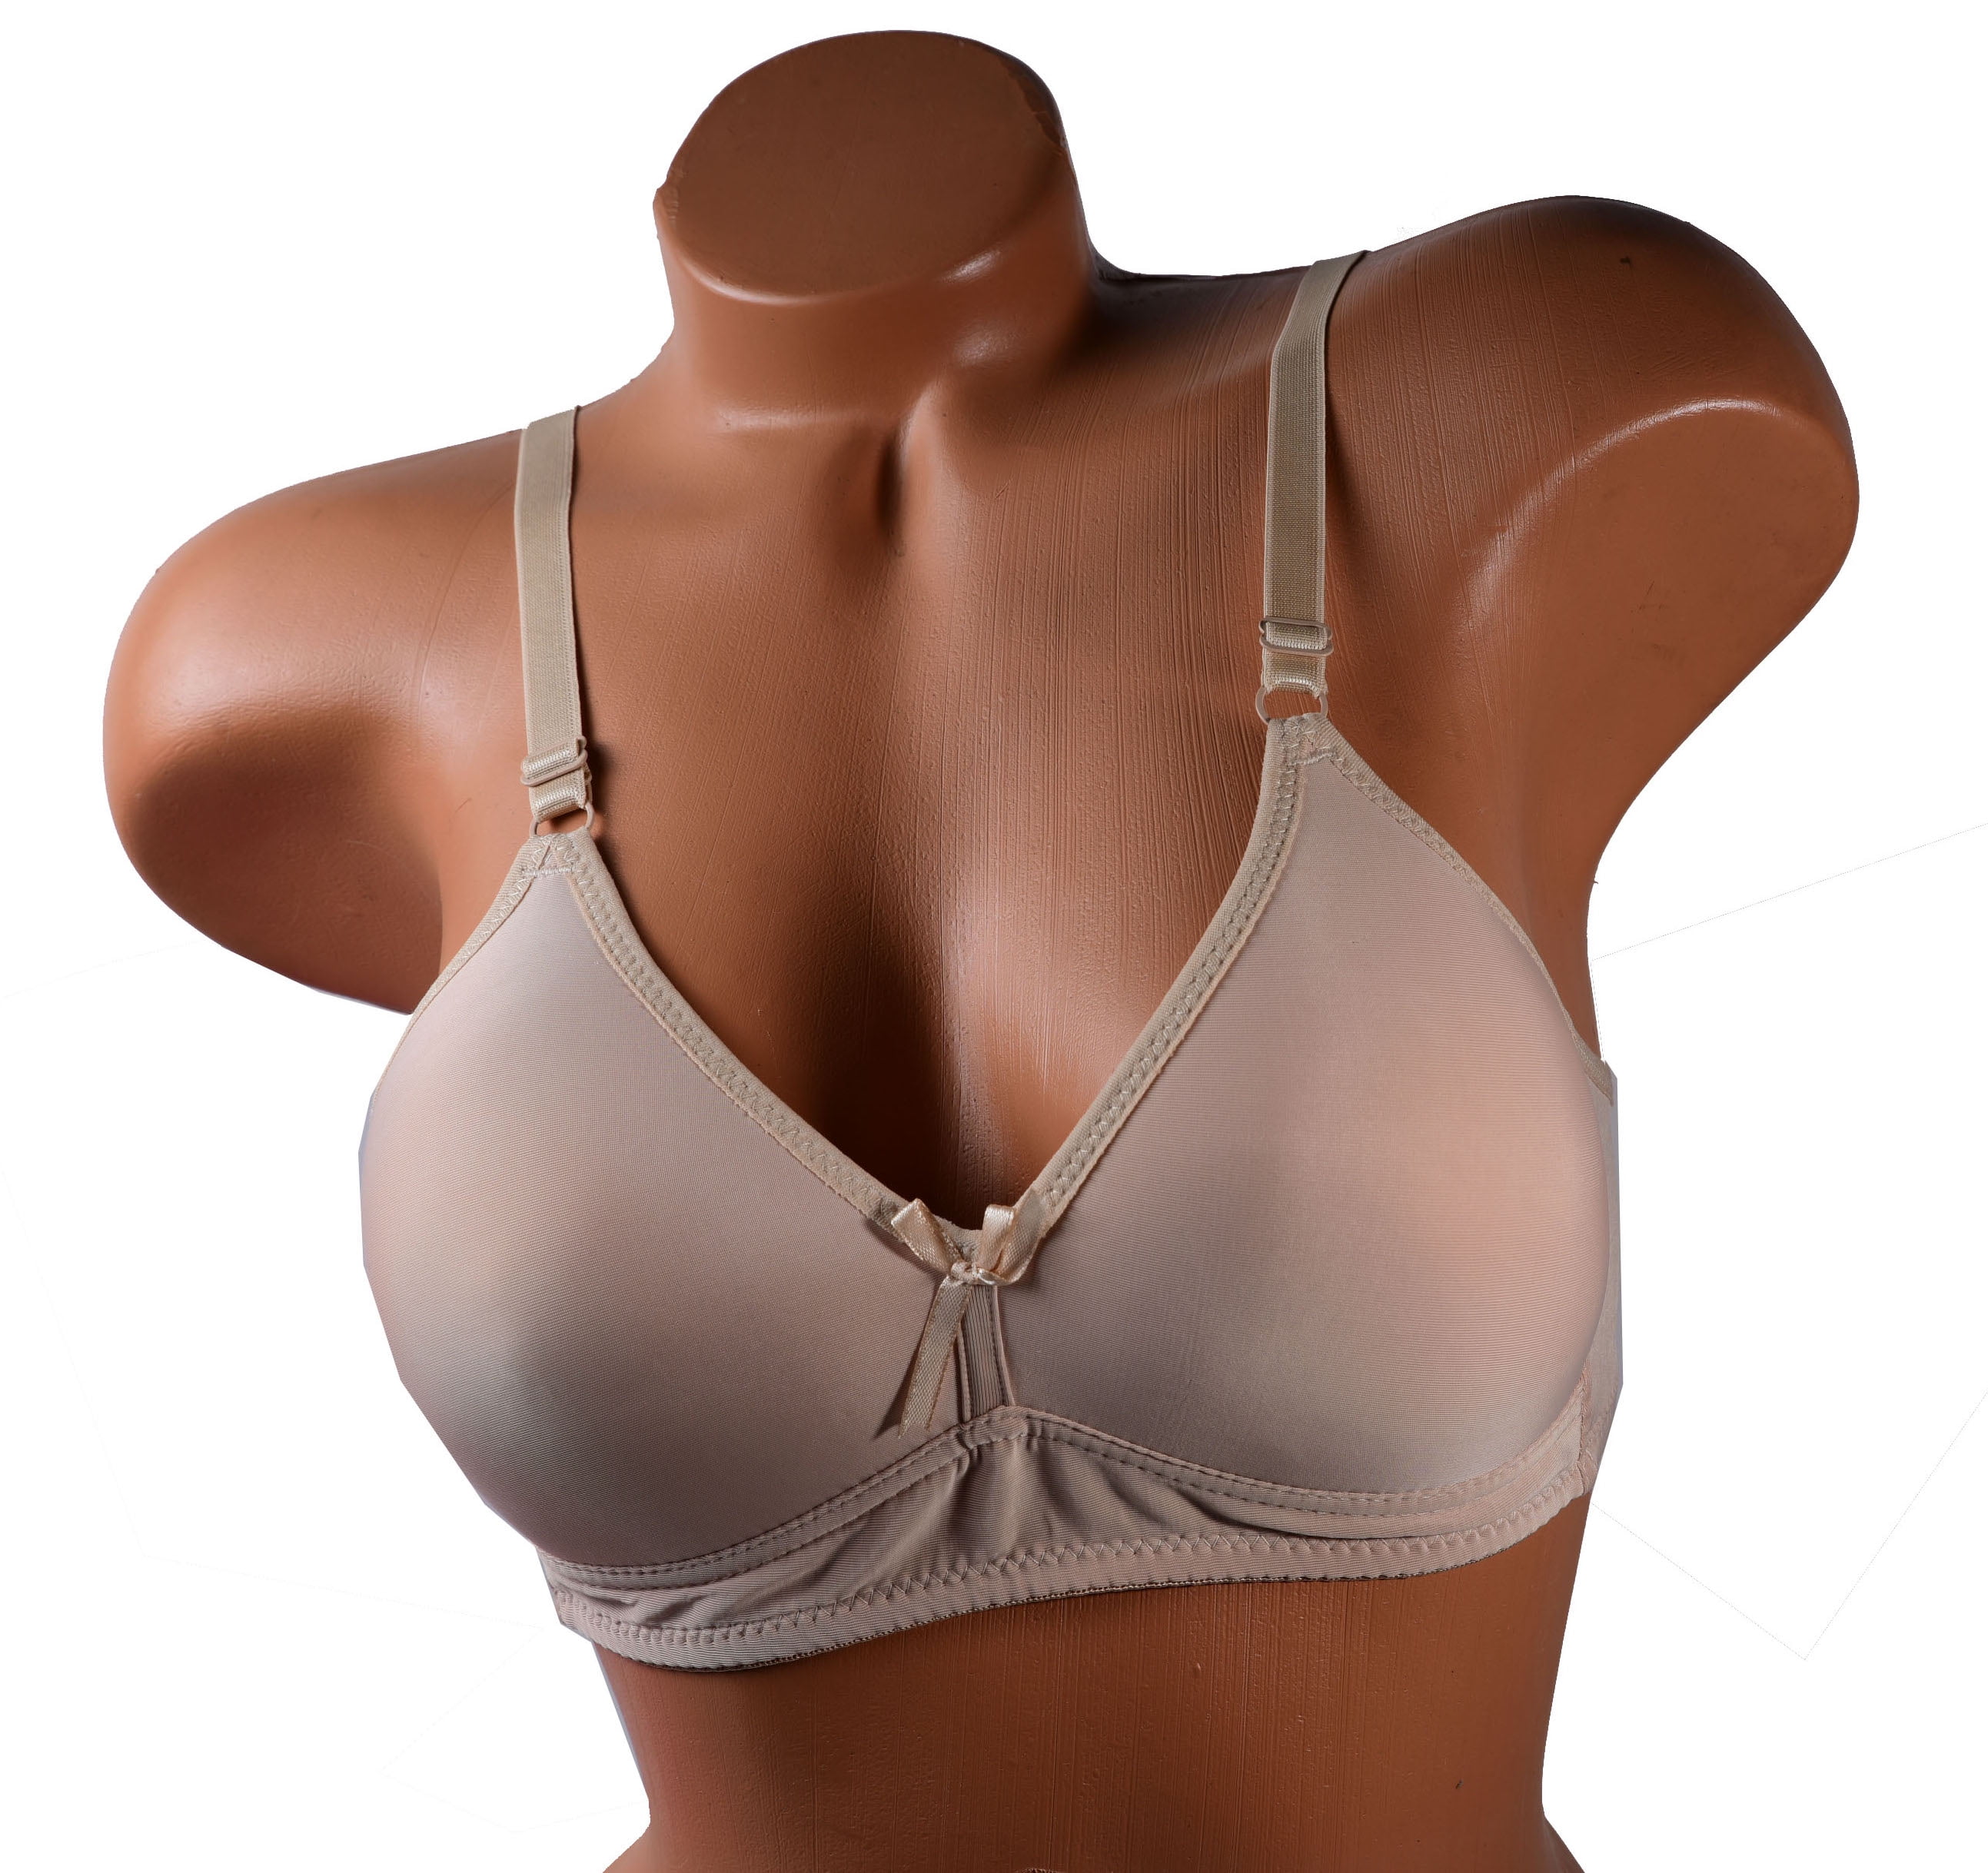 Women Bras 6 pack of Basic No Wire Free Wireless Bra B cup C cup Size 32B  (S6319) 